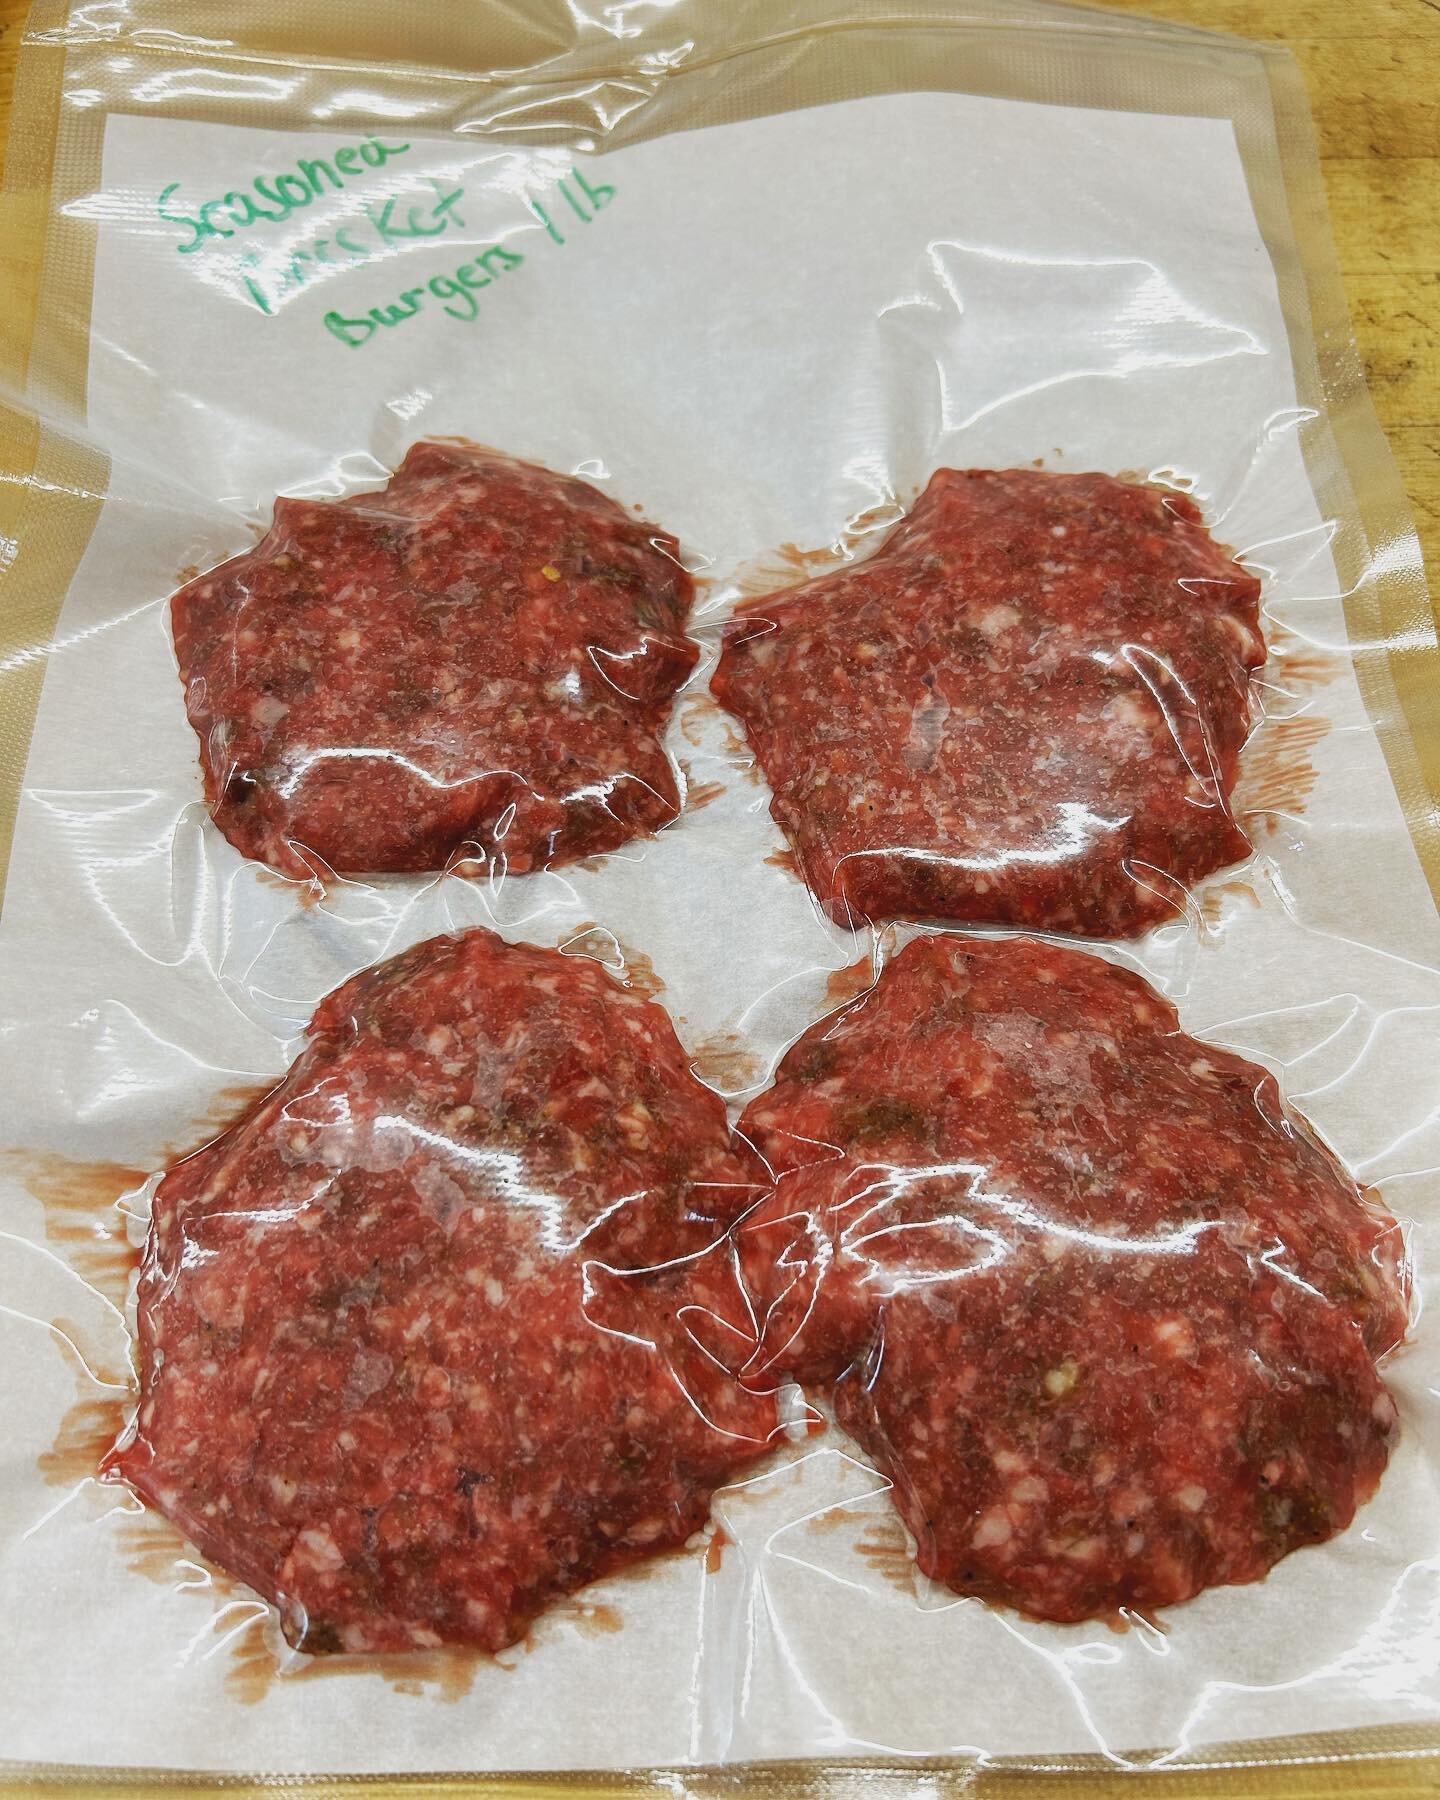 Brisket burgers ready for the grill, complete with seasoning! Get yours at the Farmers market on Saturday